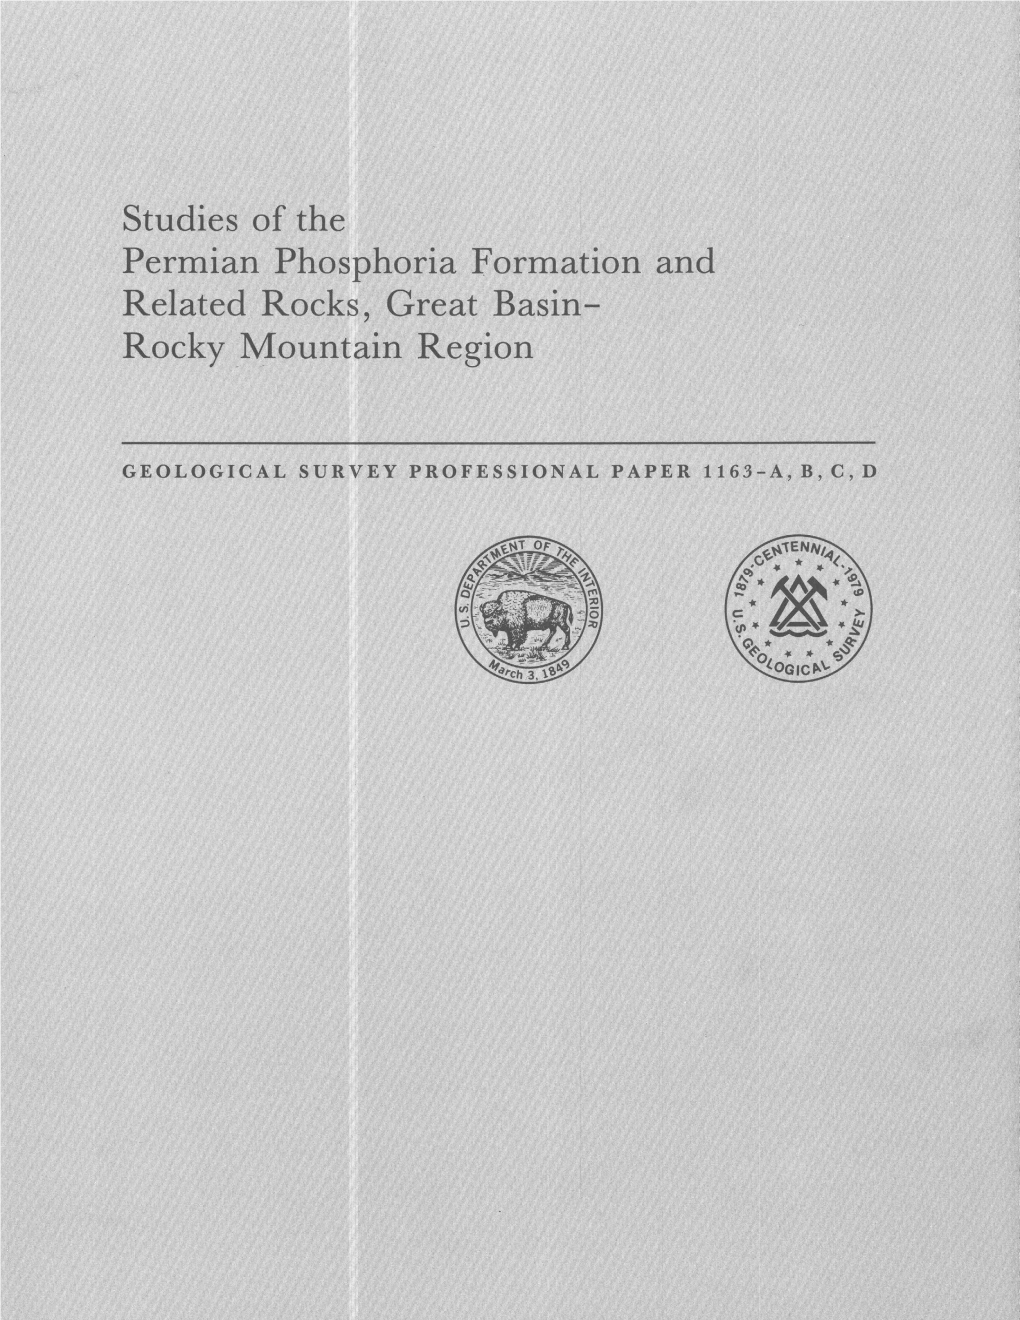 Studies of the Permian Phosphoria Formation and Related Rocks, Great Basin- Rocky 1\Jountain Region